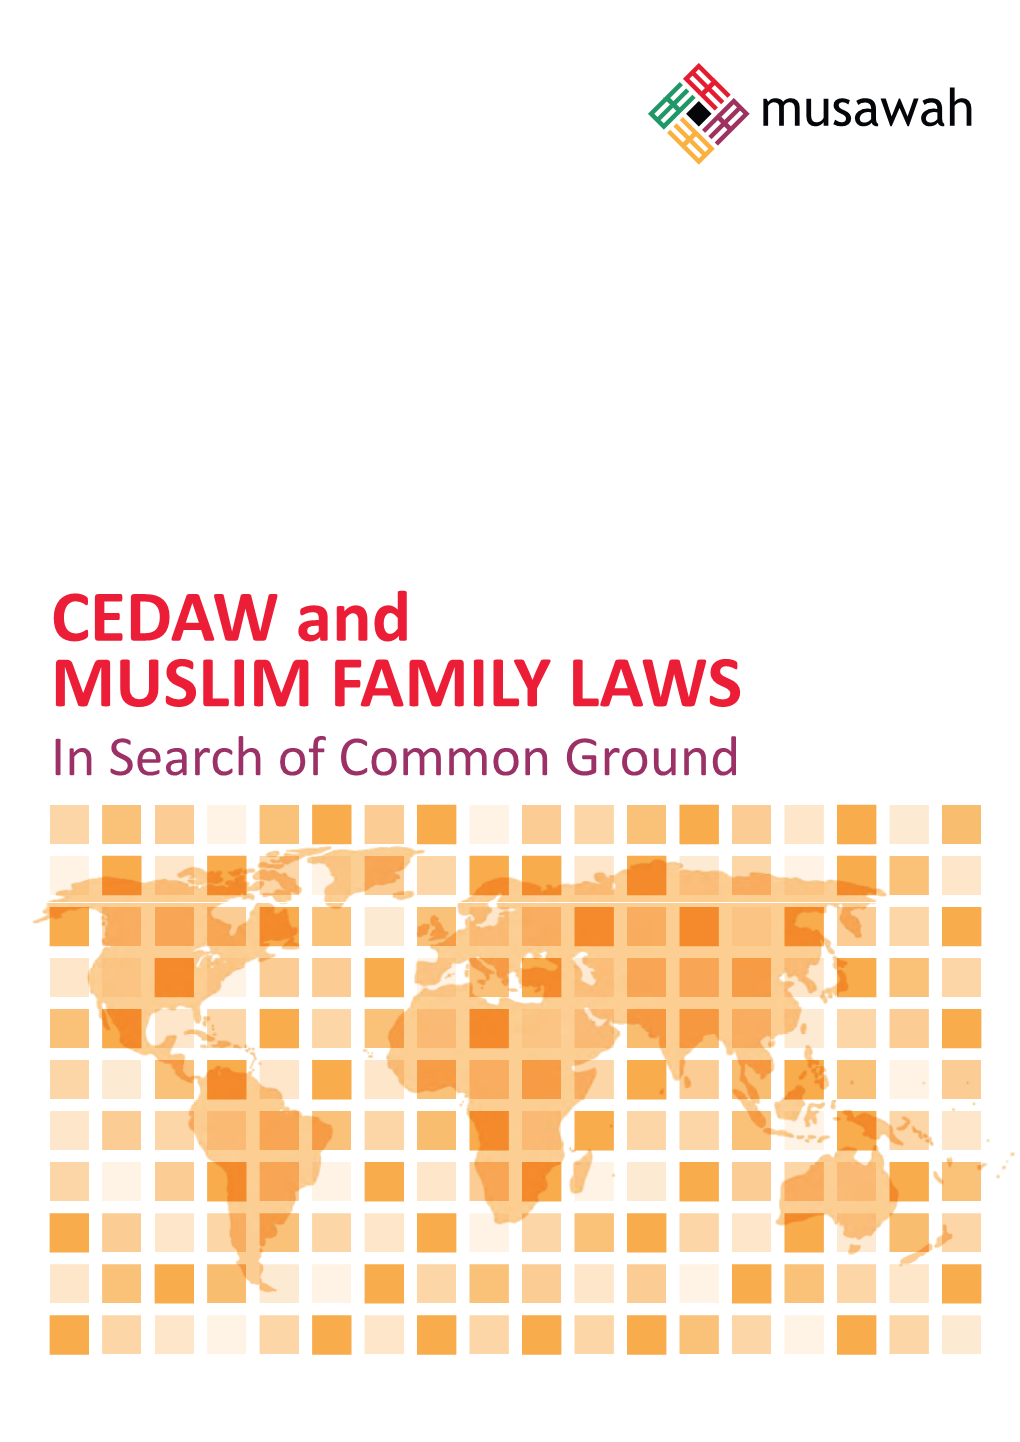 10. CEDAW and Muslim Family Laws